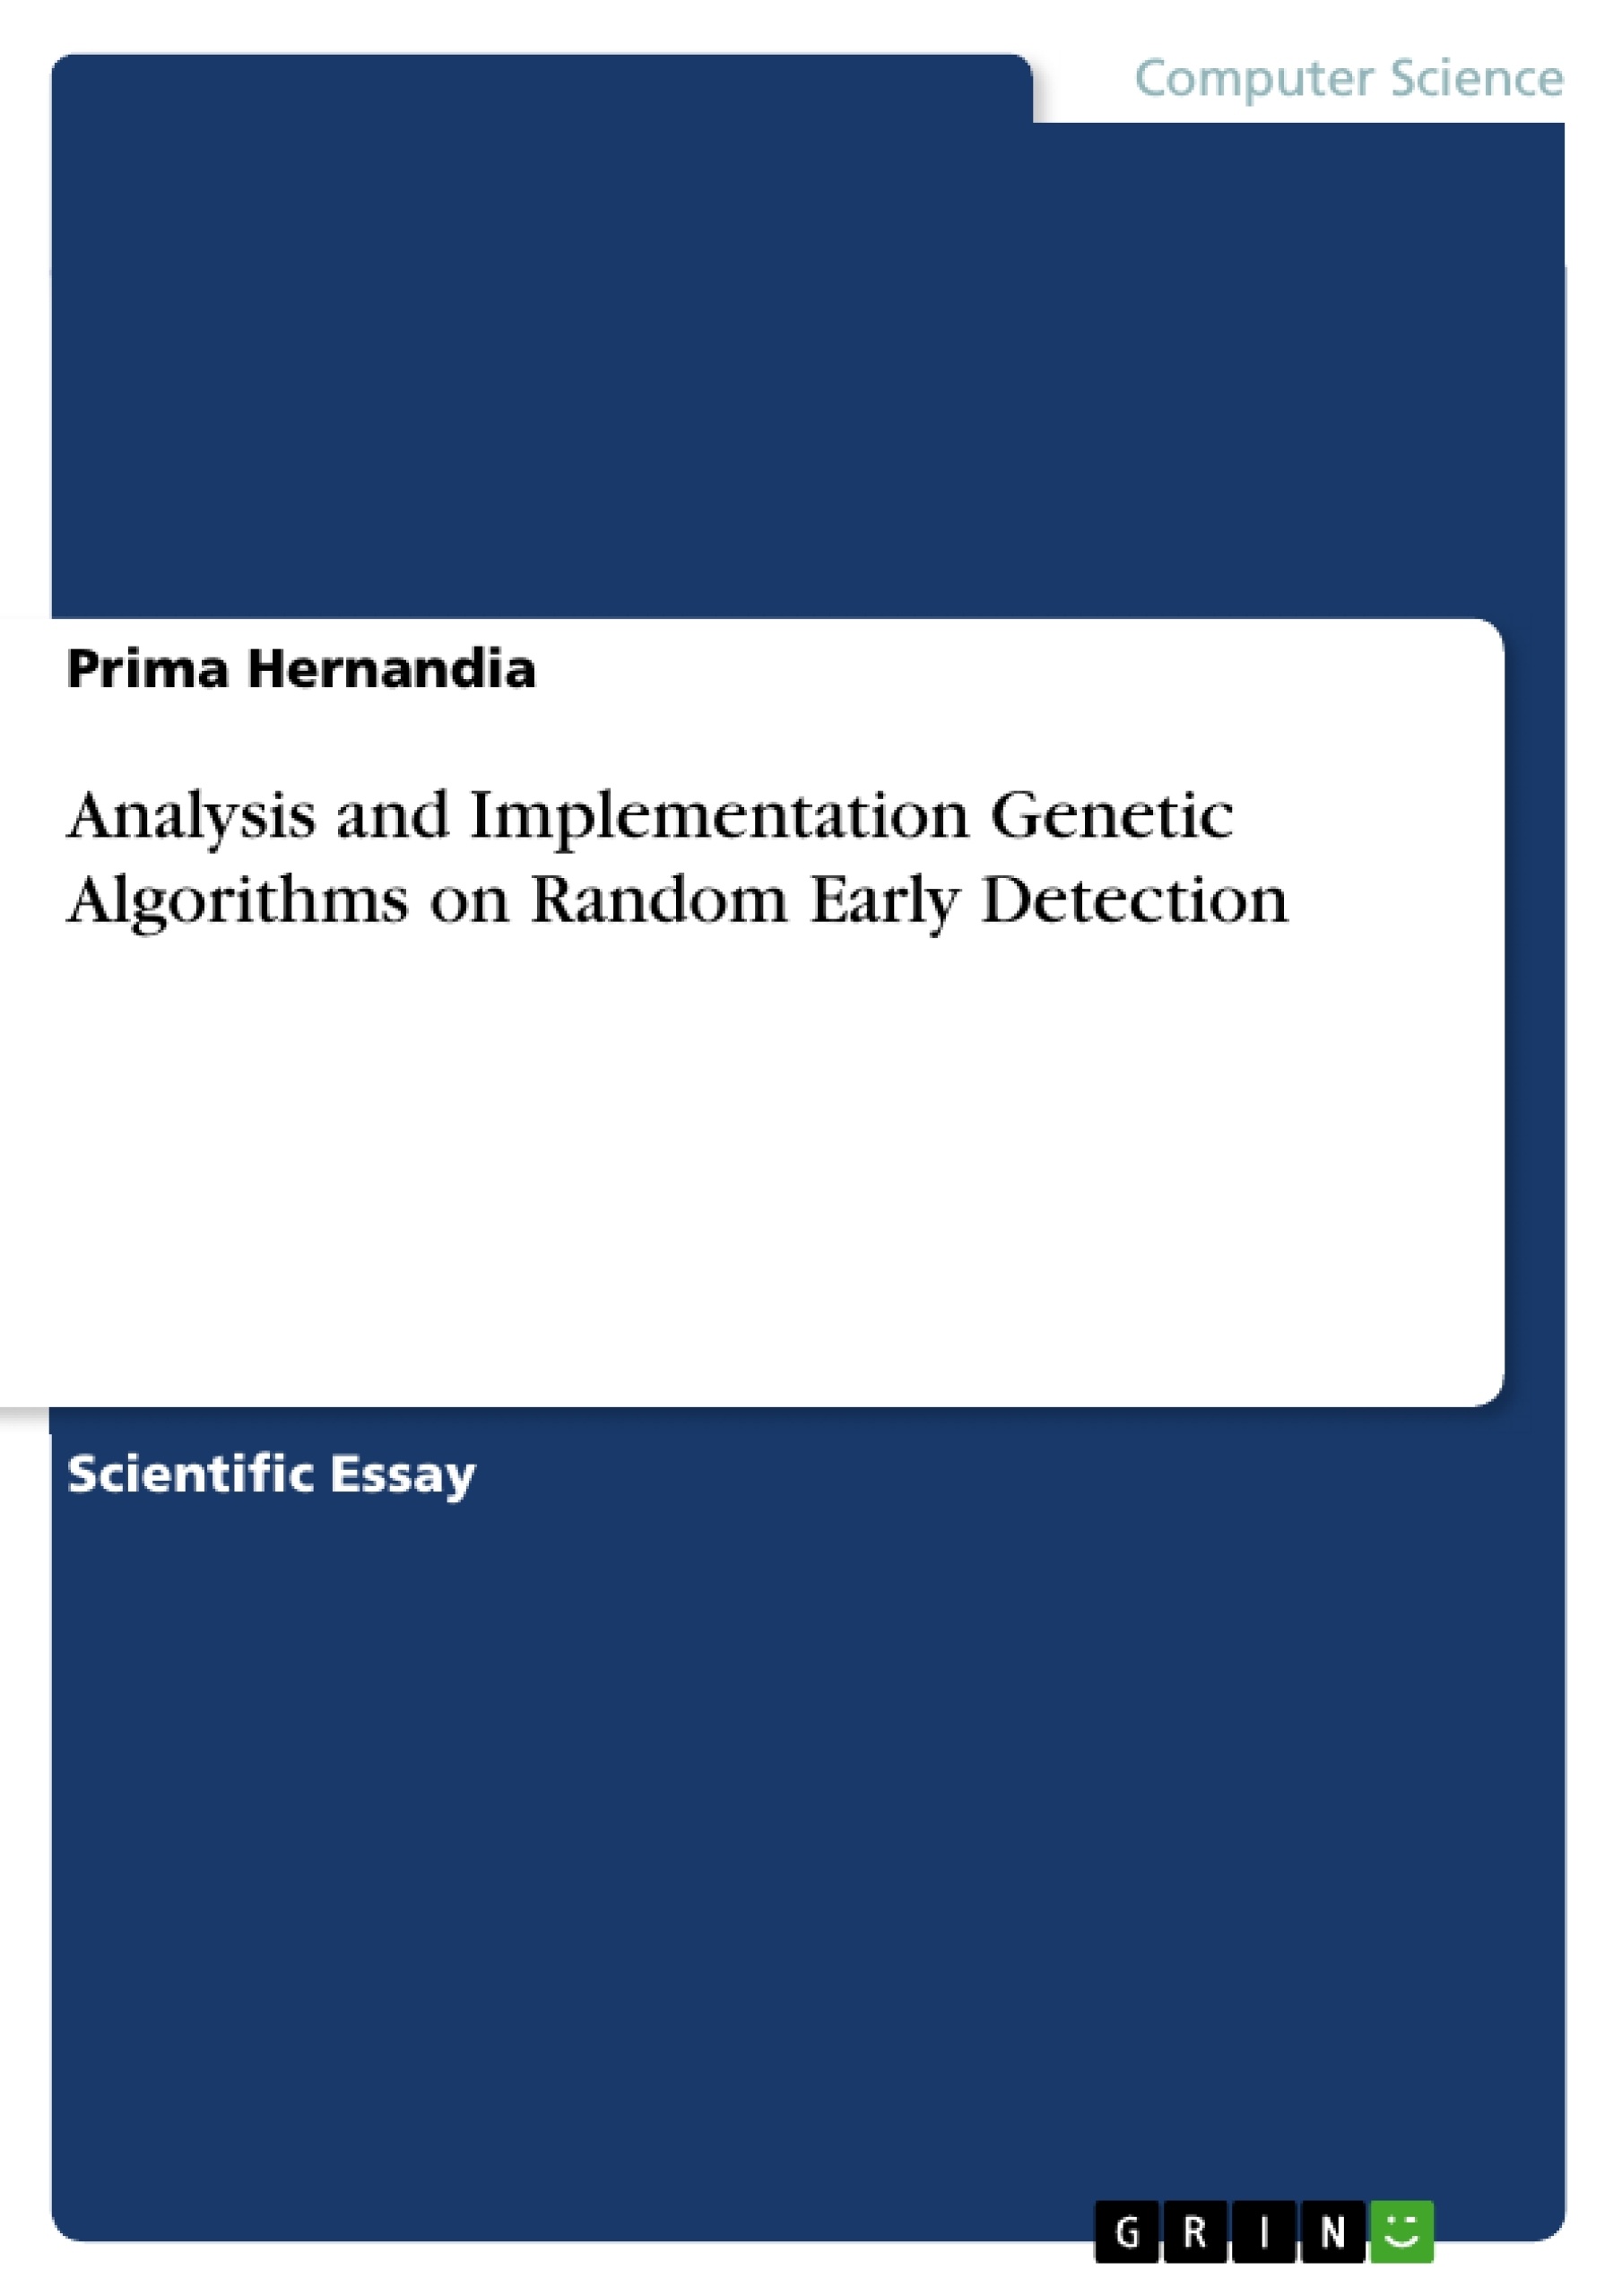 Title: Analysis and Implementation Genetic Algorithms on Random Early Detection